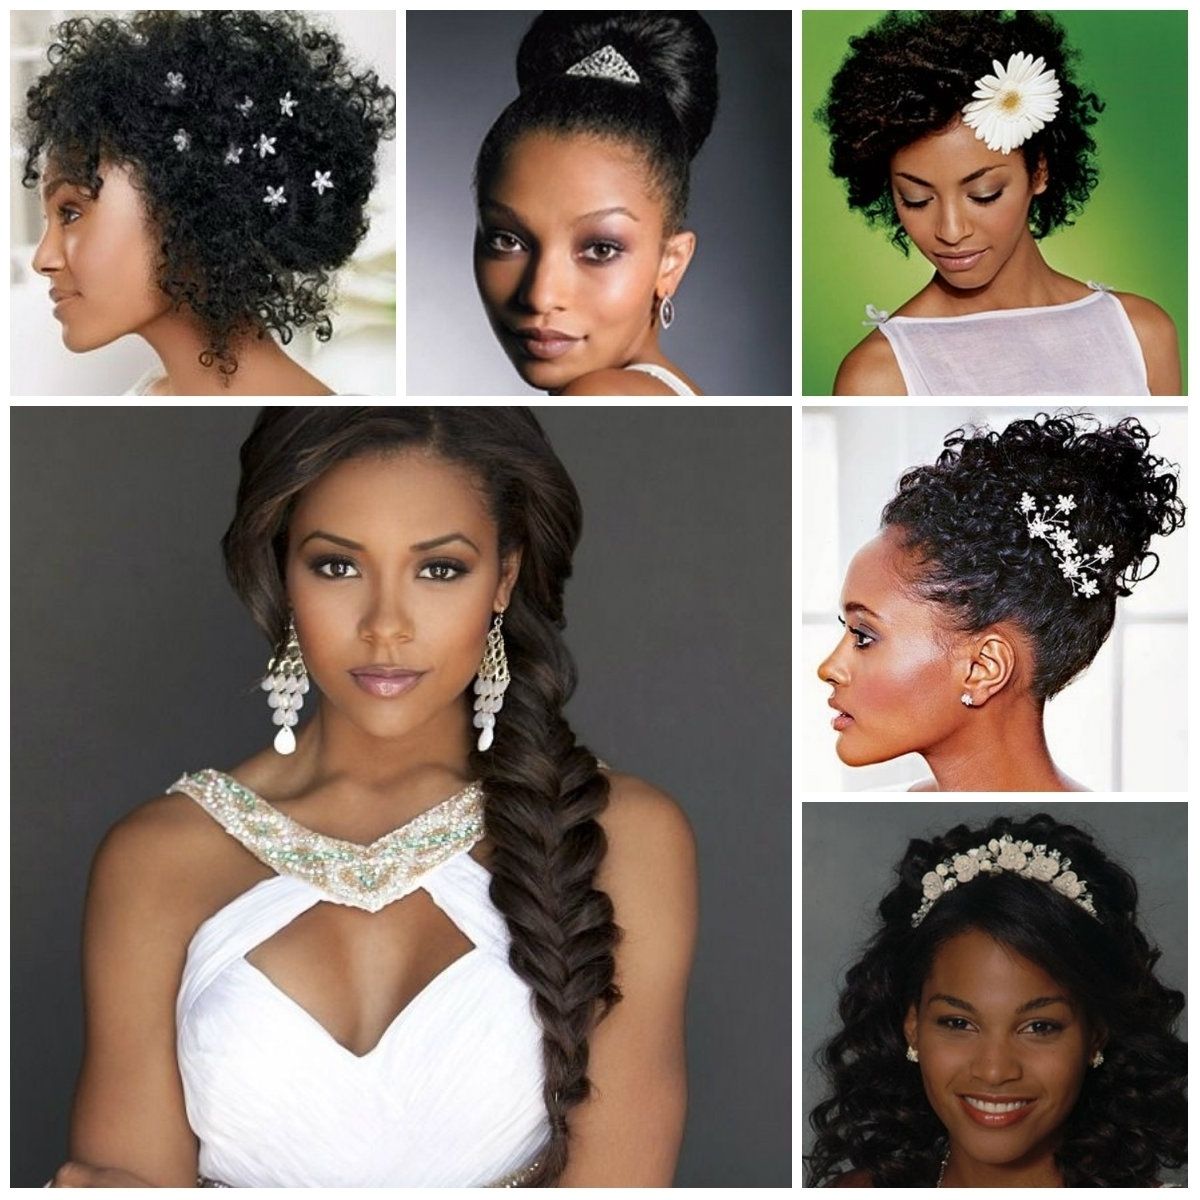 Trendy Wedding Hairstyles For African Bridesmaids For Photo: Wedding Hairstyles For Black Women Bridesmaids Hairstyles For (View 11 of 15)